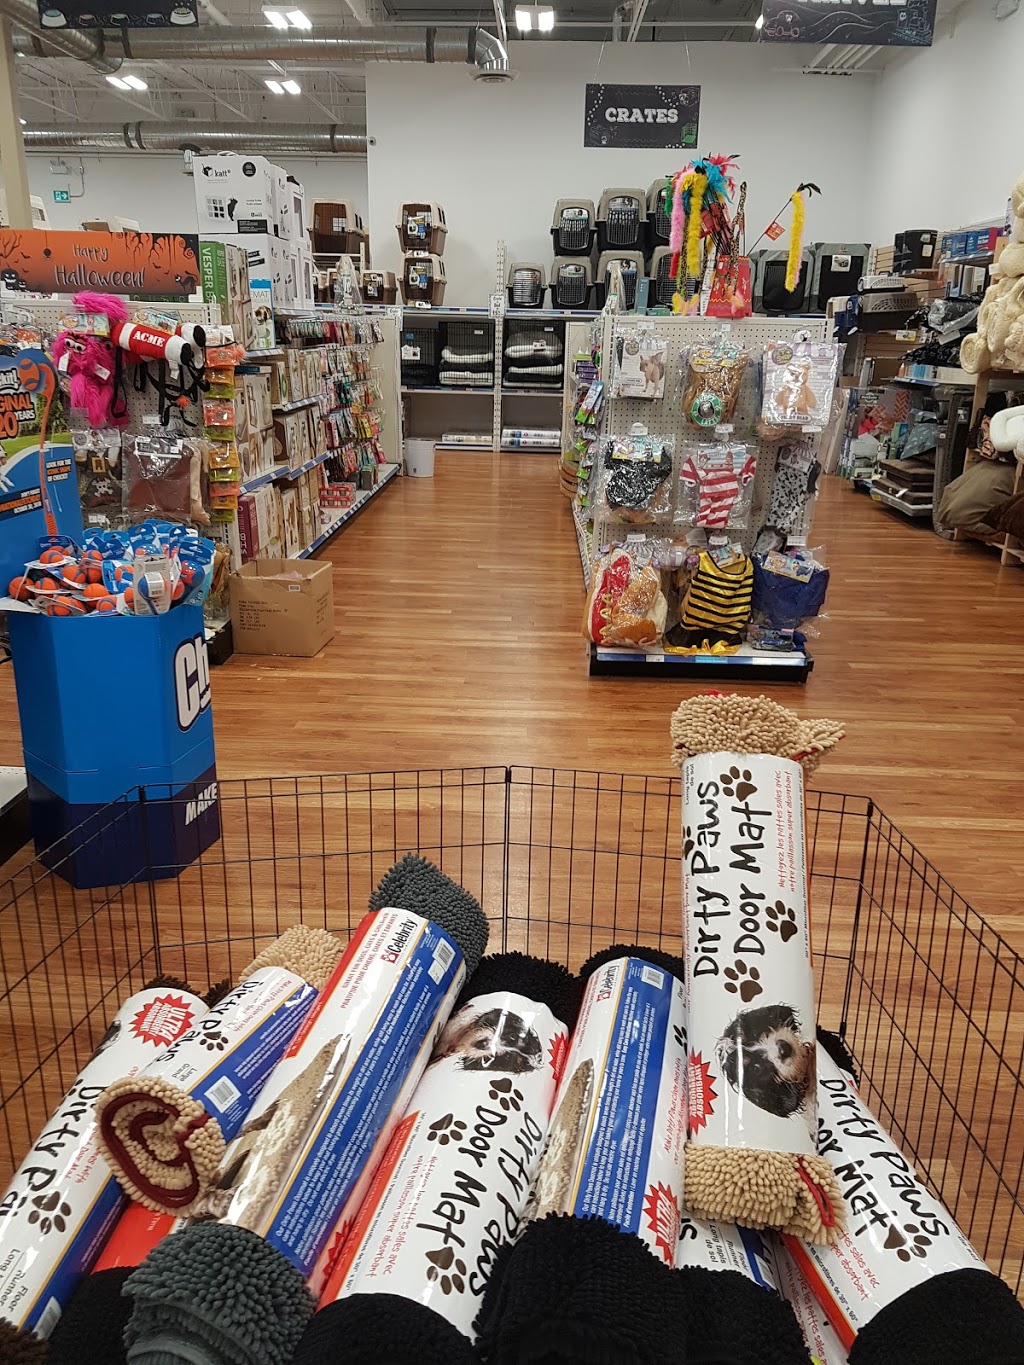 Rens Pets Depot | store | 81 Billy Bishop Way, North York, ON M3K 2C8, Canada | 4166386002 OR +1 416-638-6002